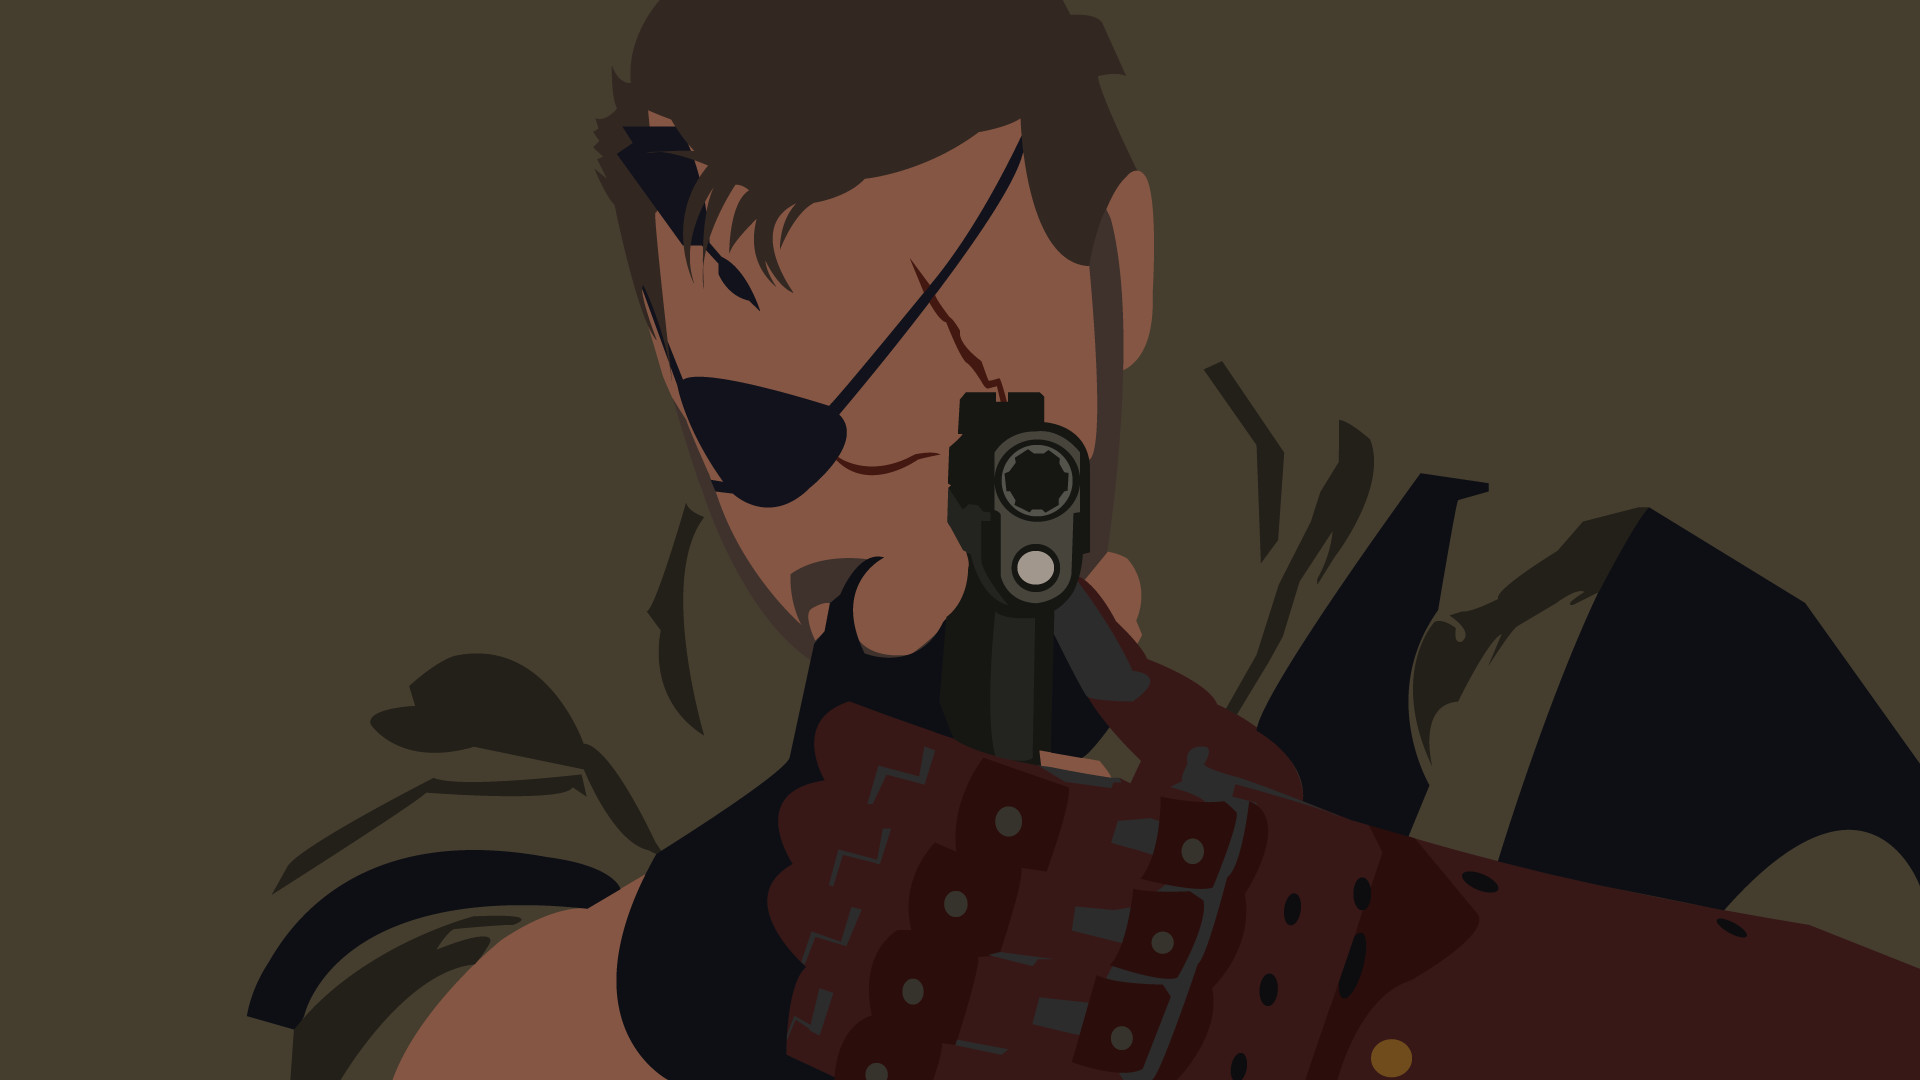 1920x1080 Related wallpapers. Metal Gear Solid V The Phantom Pain, Big Boss,  minimalism, Metal Gear Solid